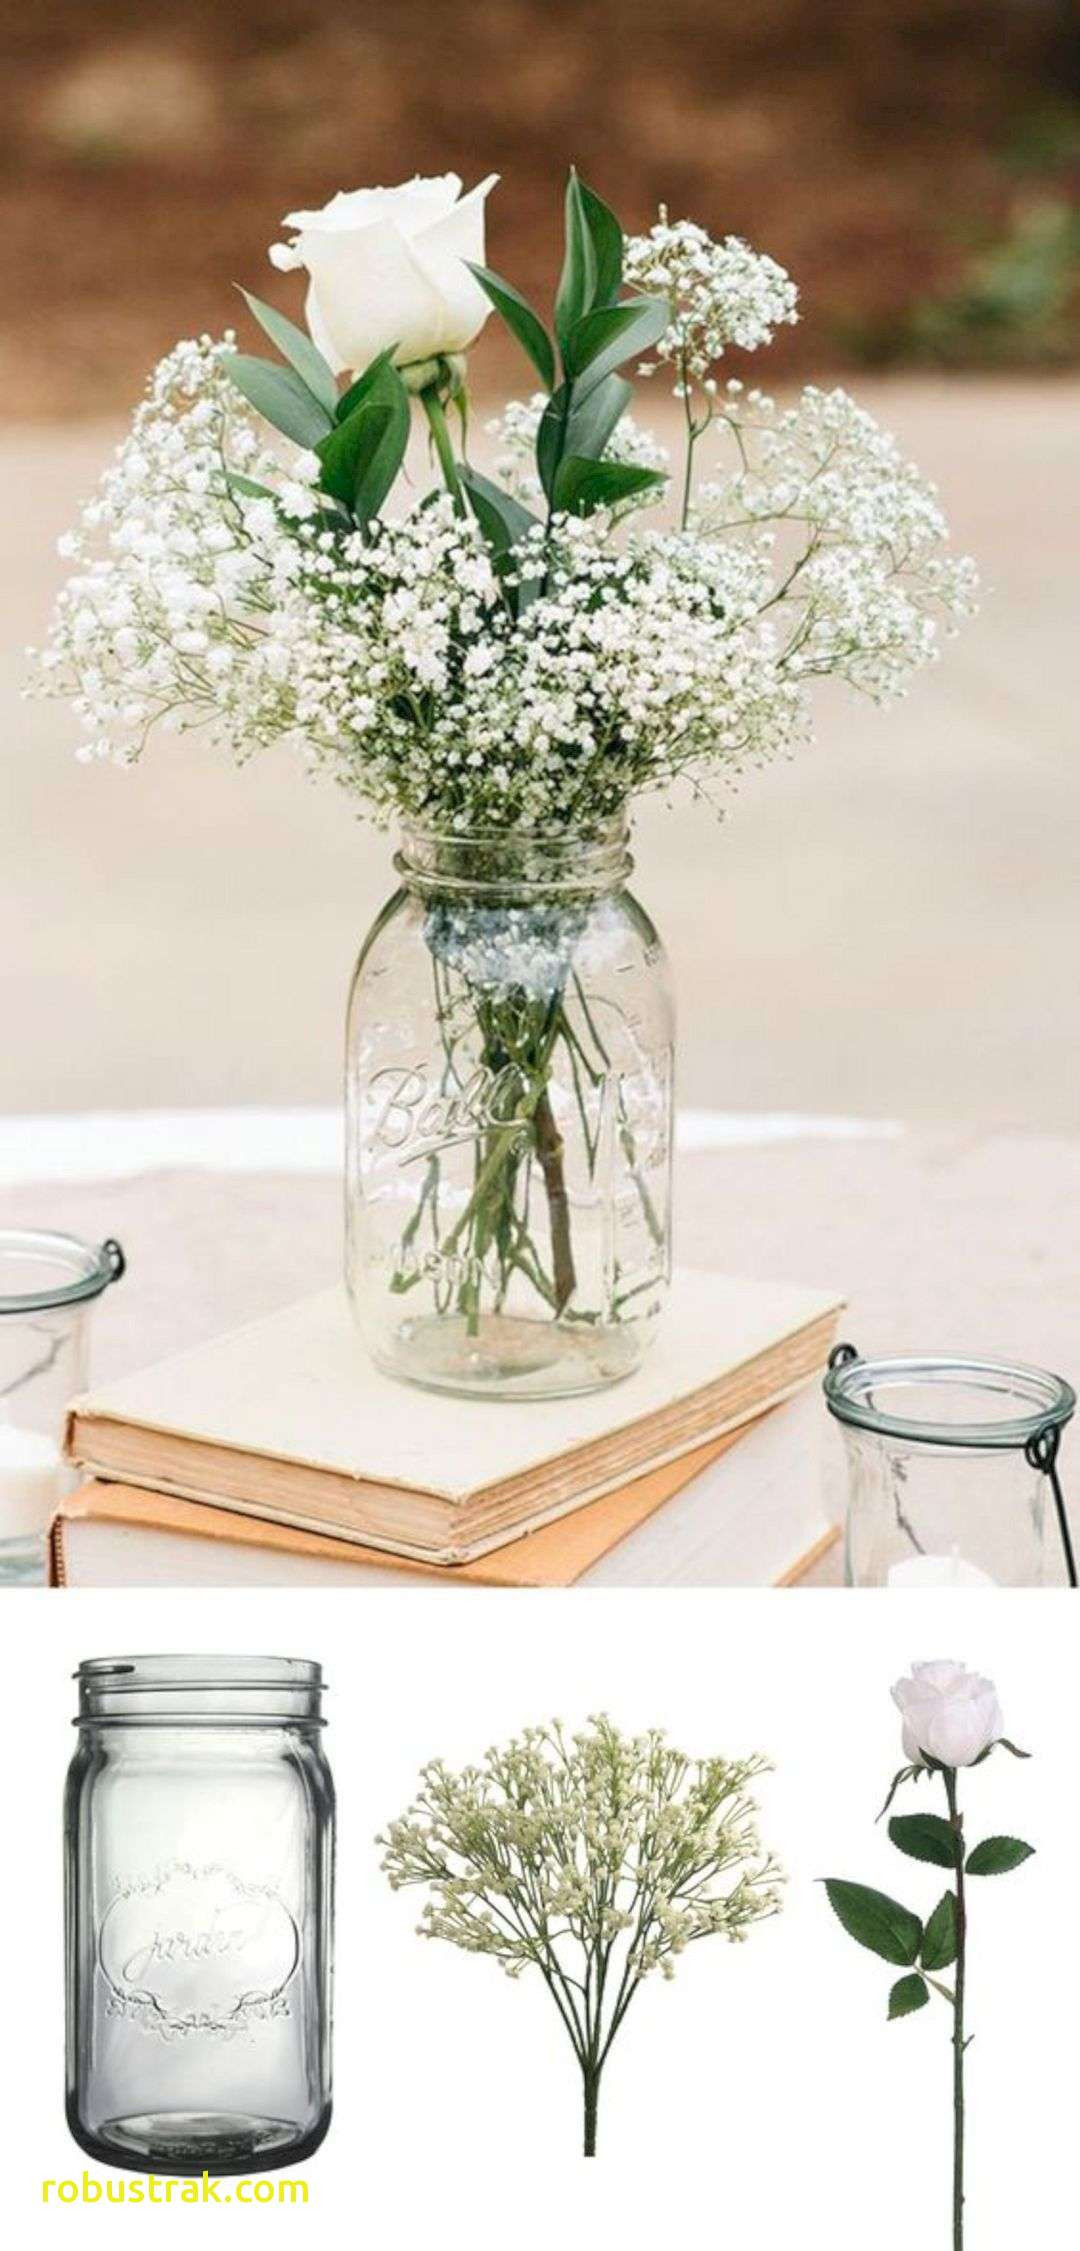 24 Nice Mason Jar Flower Vase Ideas 2024 free download mason jar flower vase ideas of inspirational wedding decorations glass bowls home design ideas with regard to how to make affordable wedding centerpieces simply place your favorite flowers i